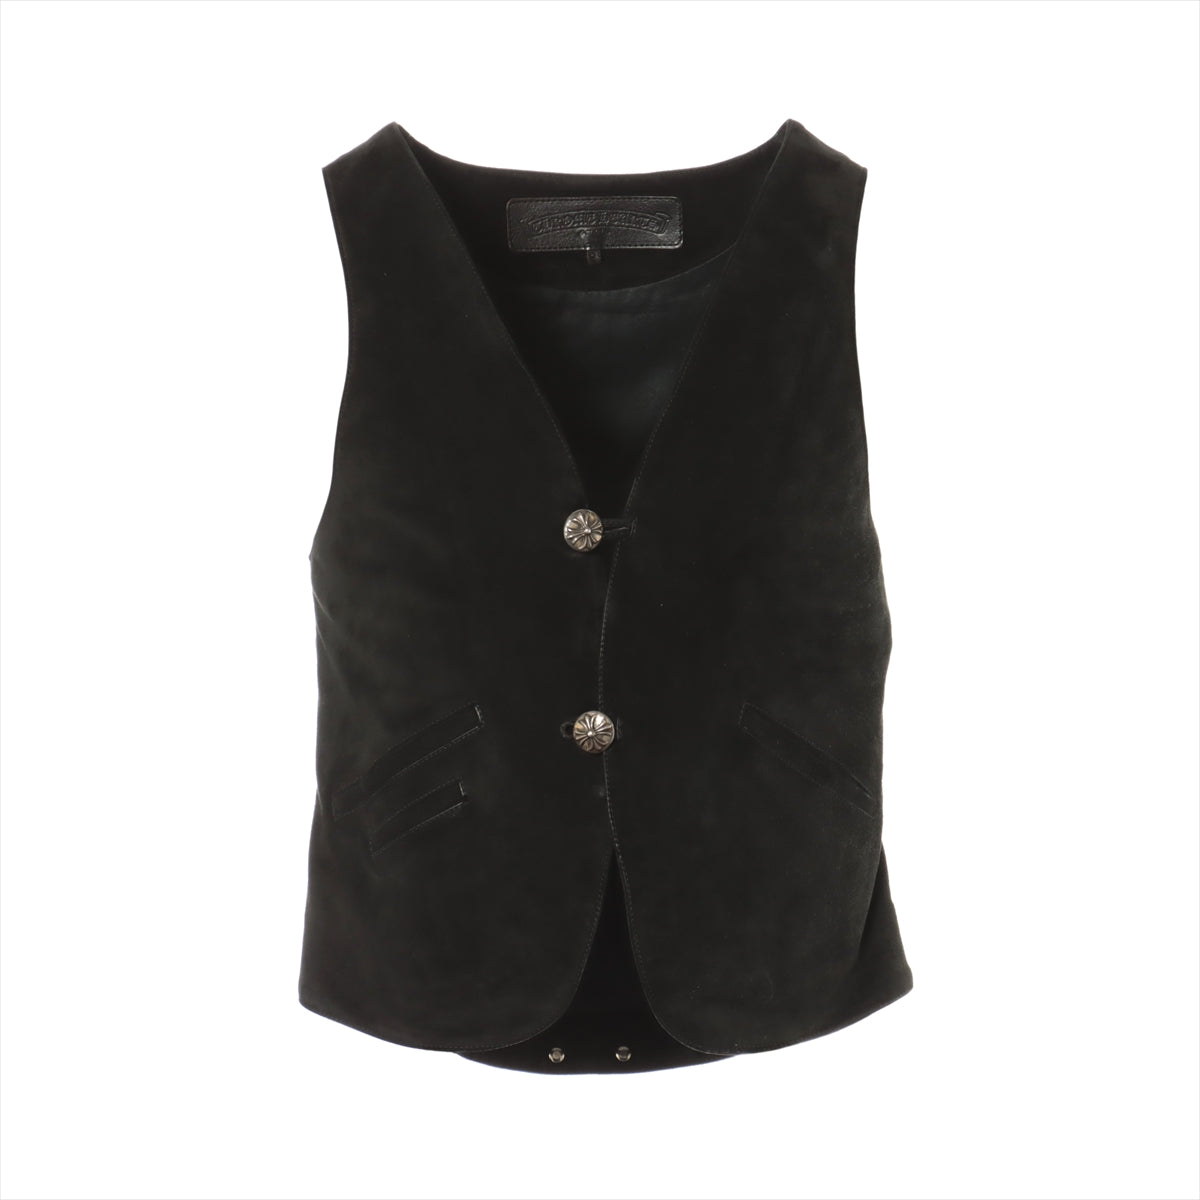 Chrome Hearts Vest Leather With invoice size S Black Suede cowhide cross ball button